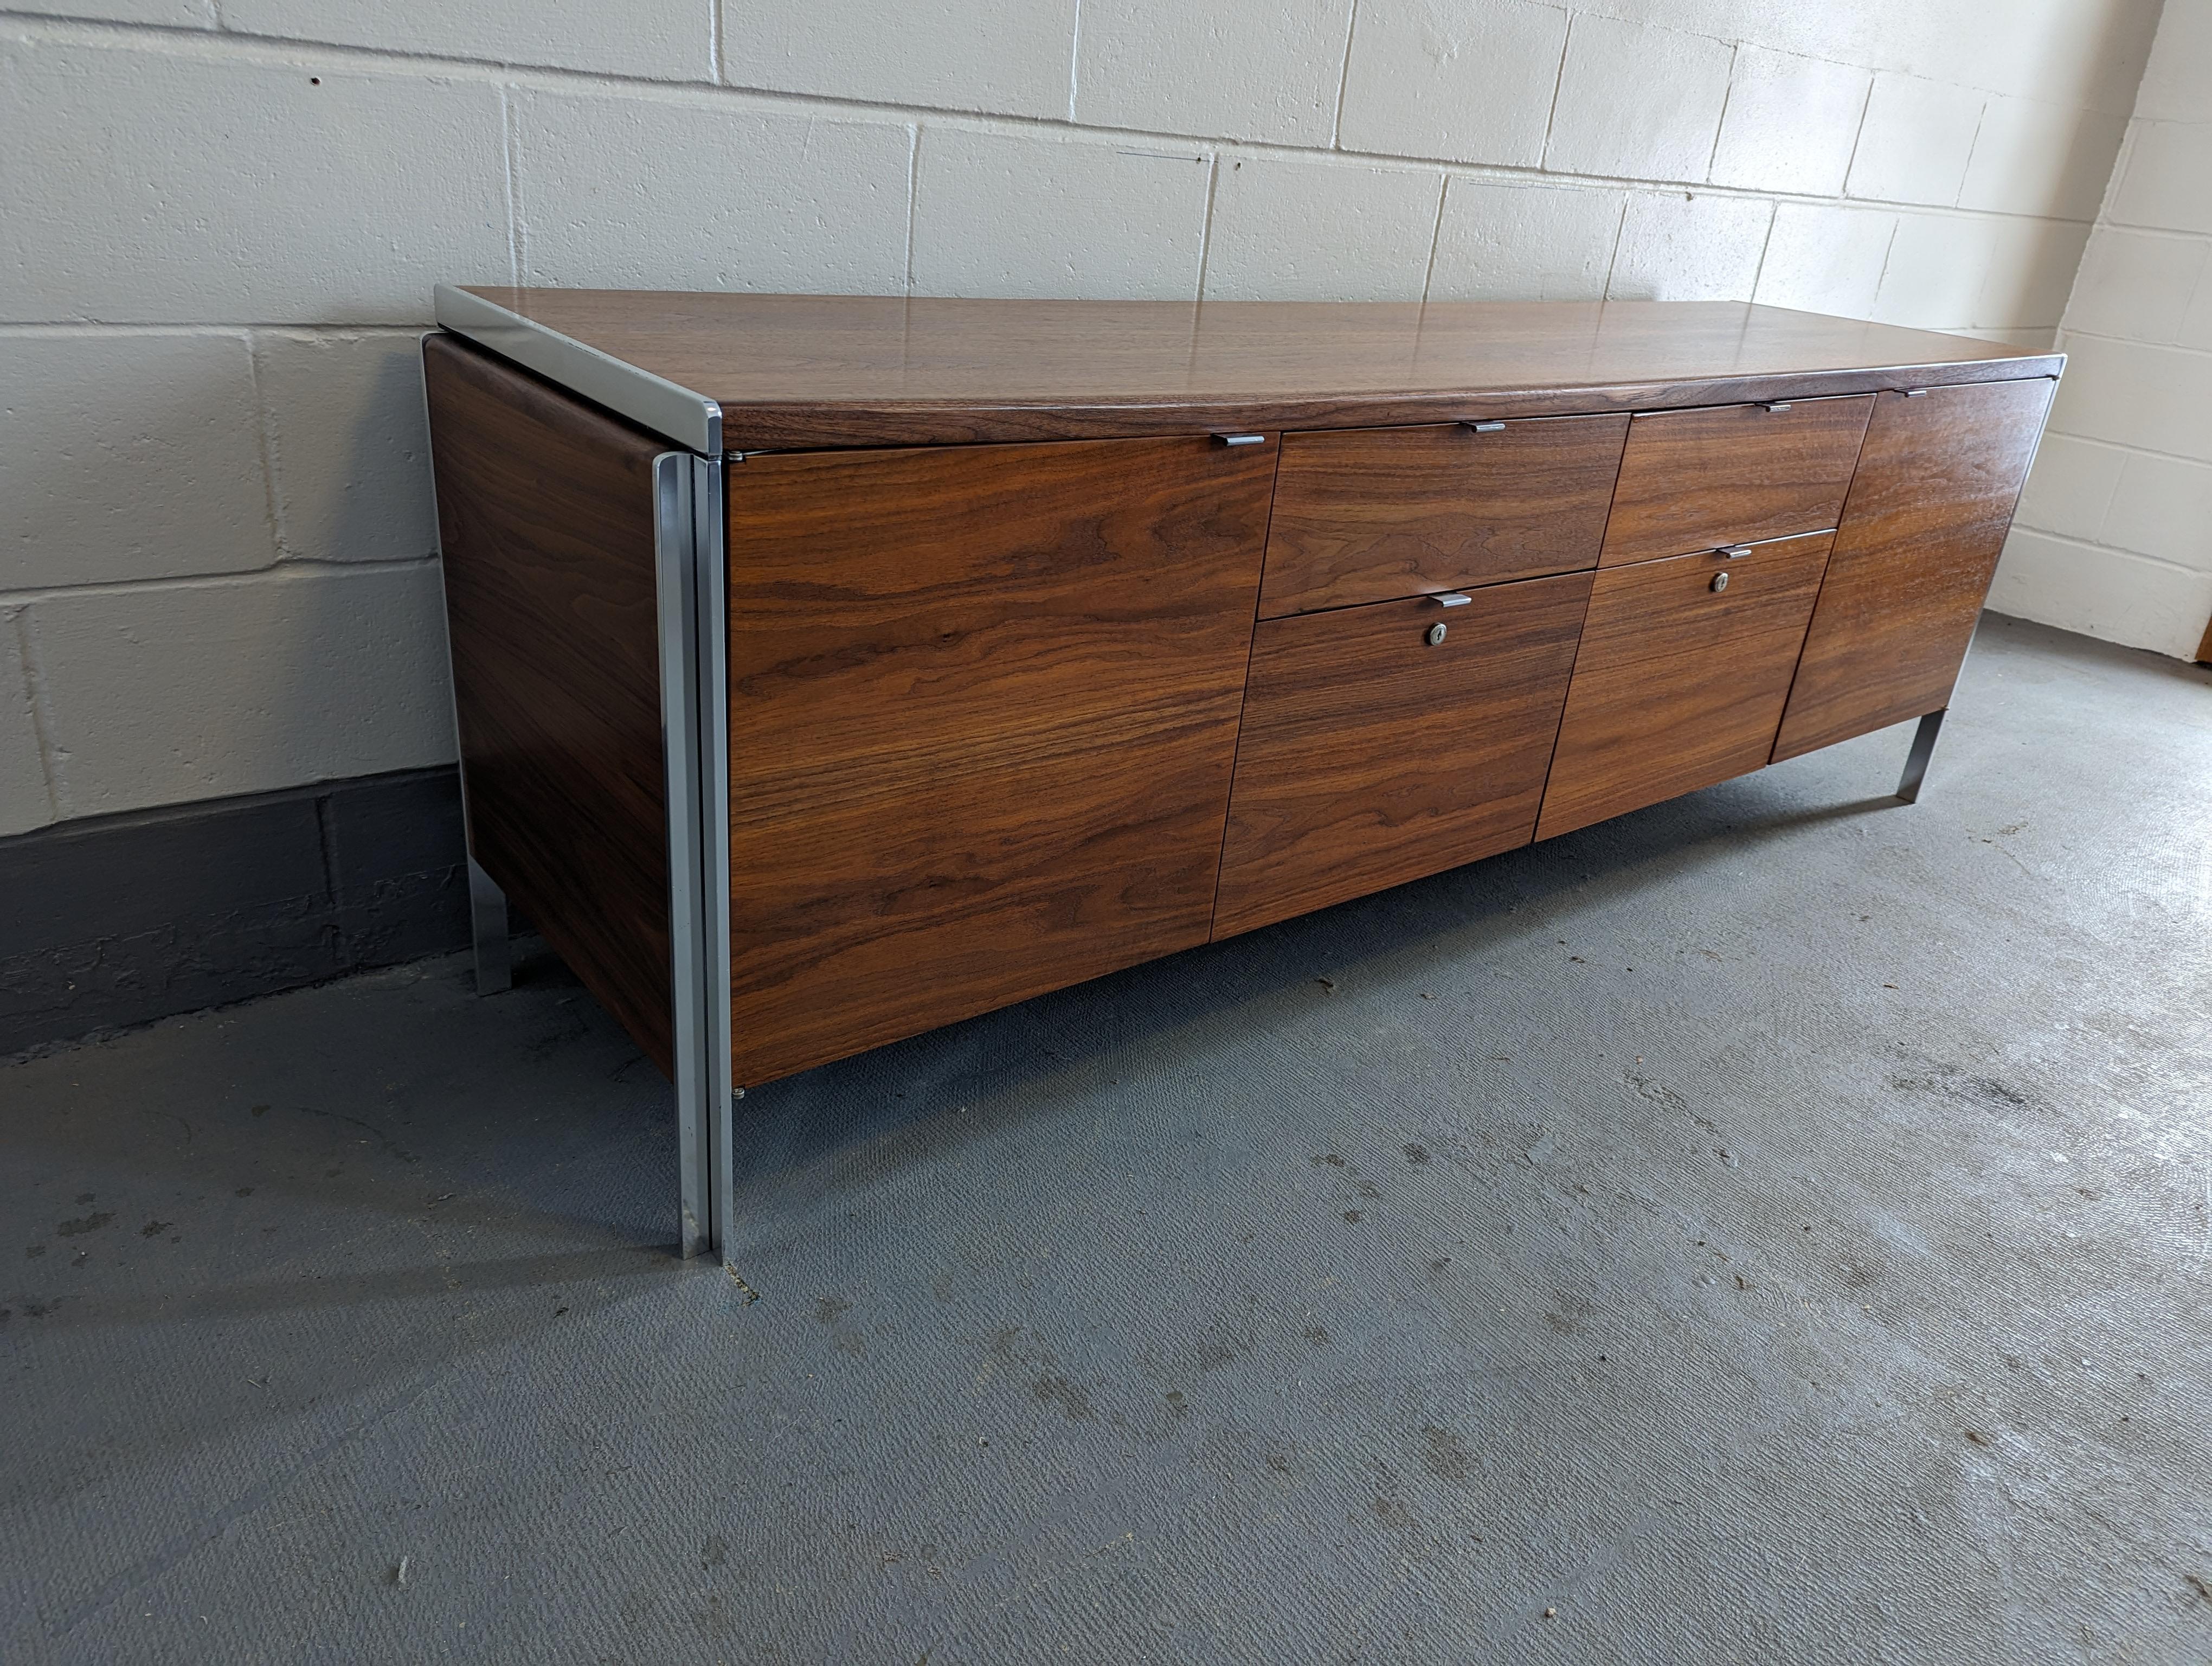 Stunning walnut color and figure present on this long sideboard designed by Alexis Yermakov for Stow Davis' 